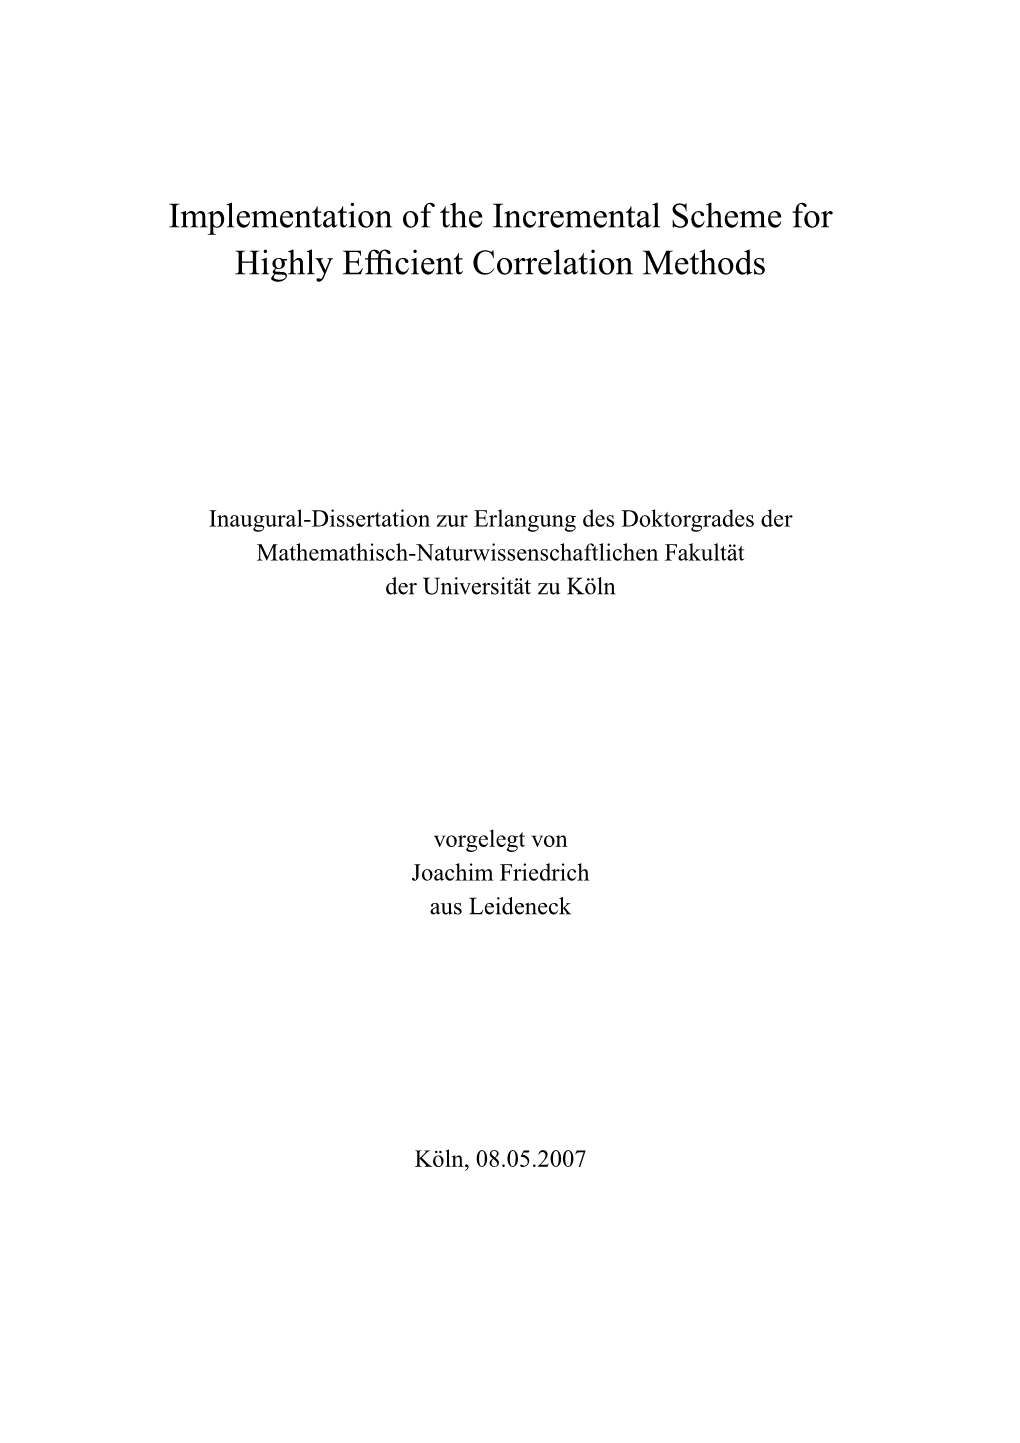 Implementation of the Incremental Scheme for Highly Efficient Correlation Methods